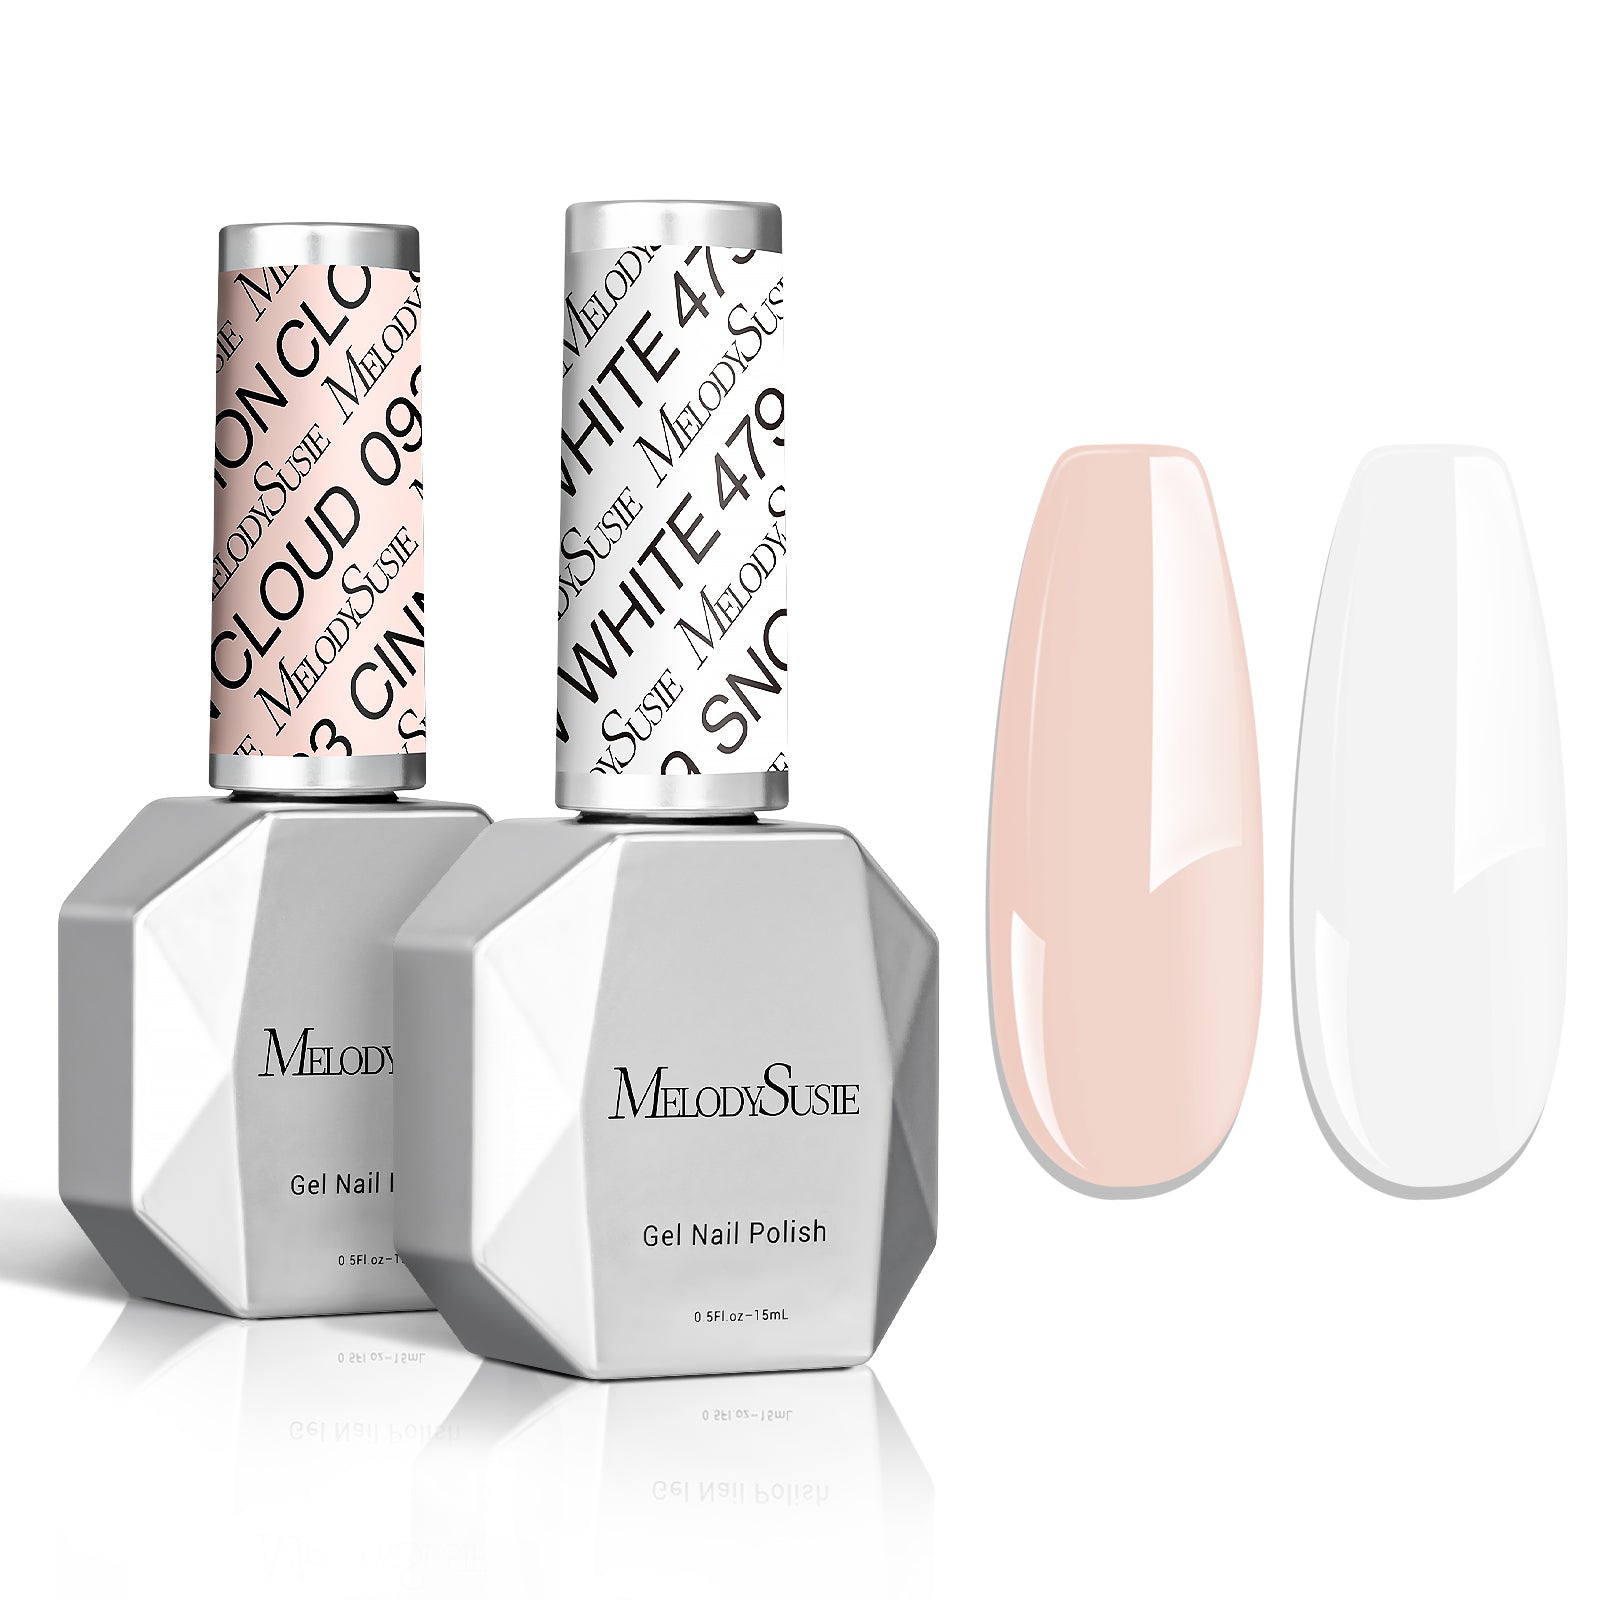 2 Pack 15ml Gel Nail Polish (Nude Pink and White)